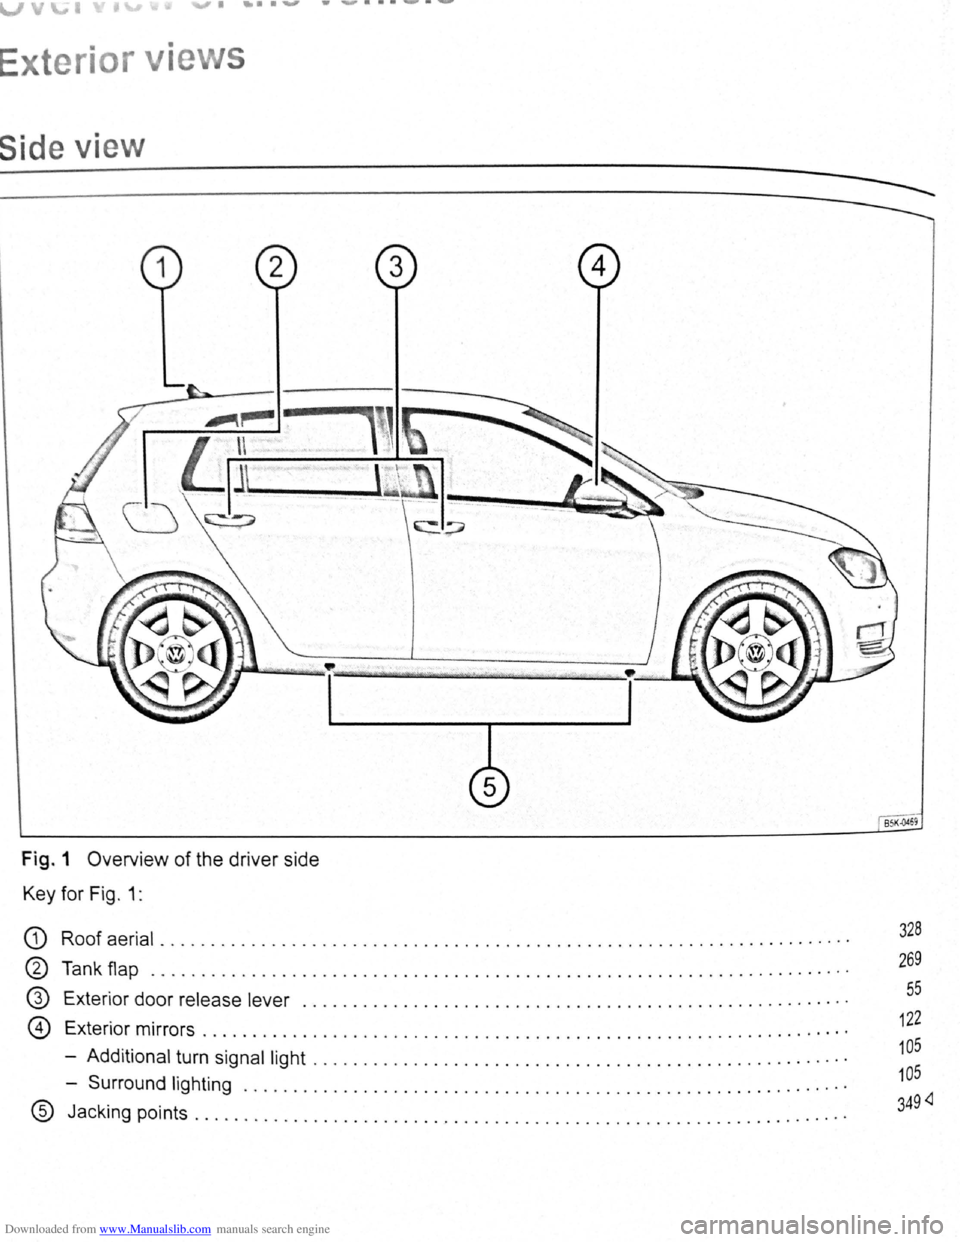 VOLKSWAGEN BEETLE 2011  Owner´s Manual Downloaded from www.Manualslib.com manuals search engine V \...1 tv ...., .......................... ..... 
Exterior views 
Side view 
Fig.  1 Overview of the  driver  side 
Key  for Fig. 1: 
G) Roof 